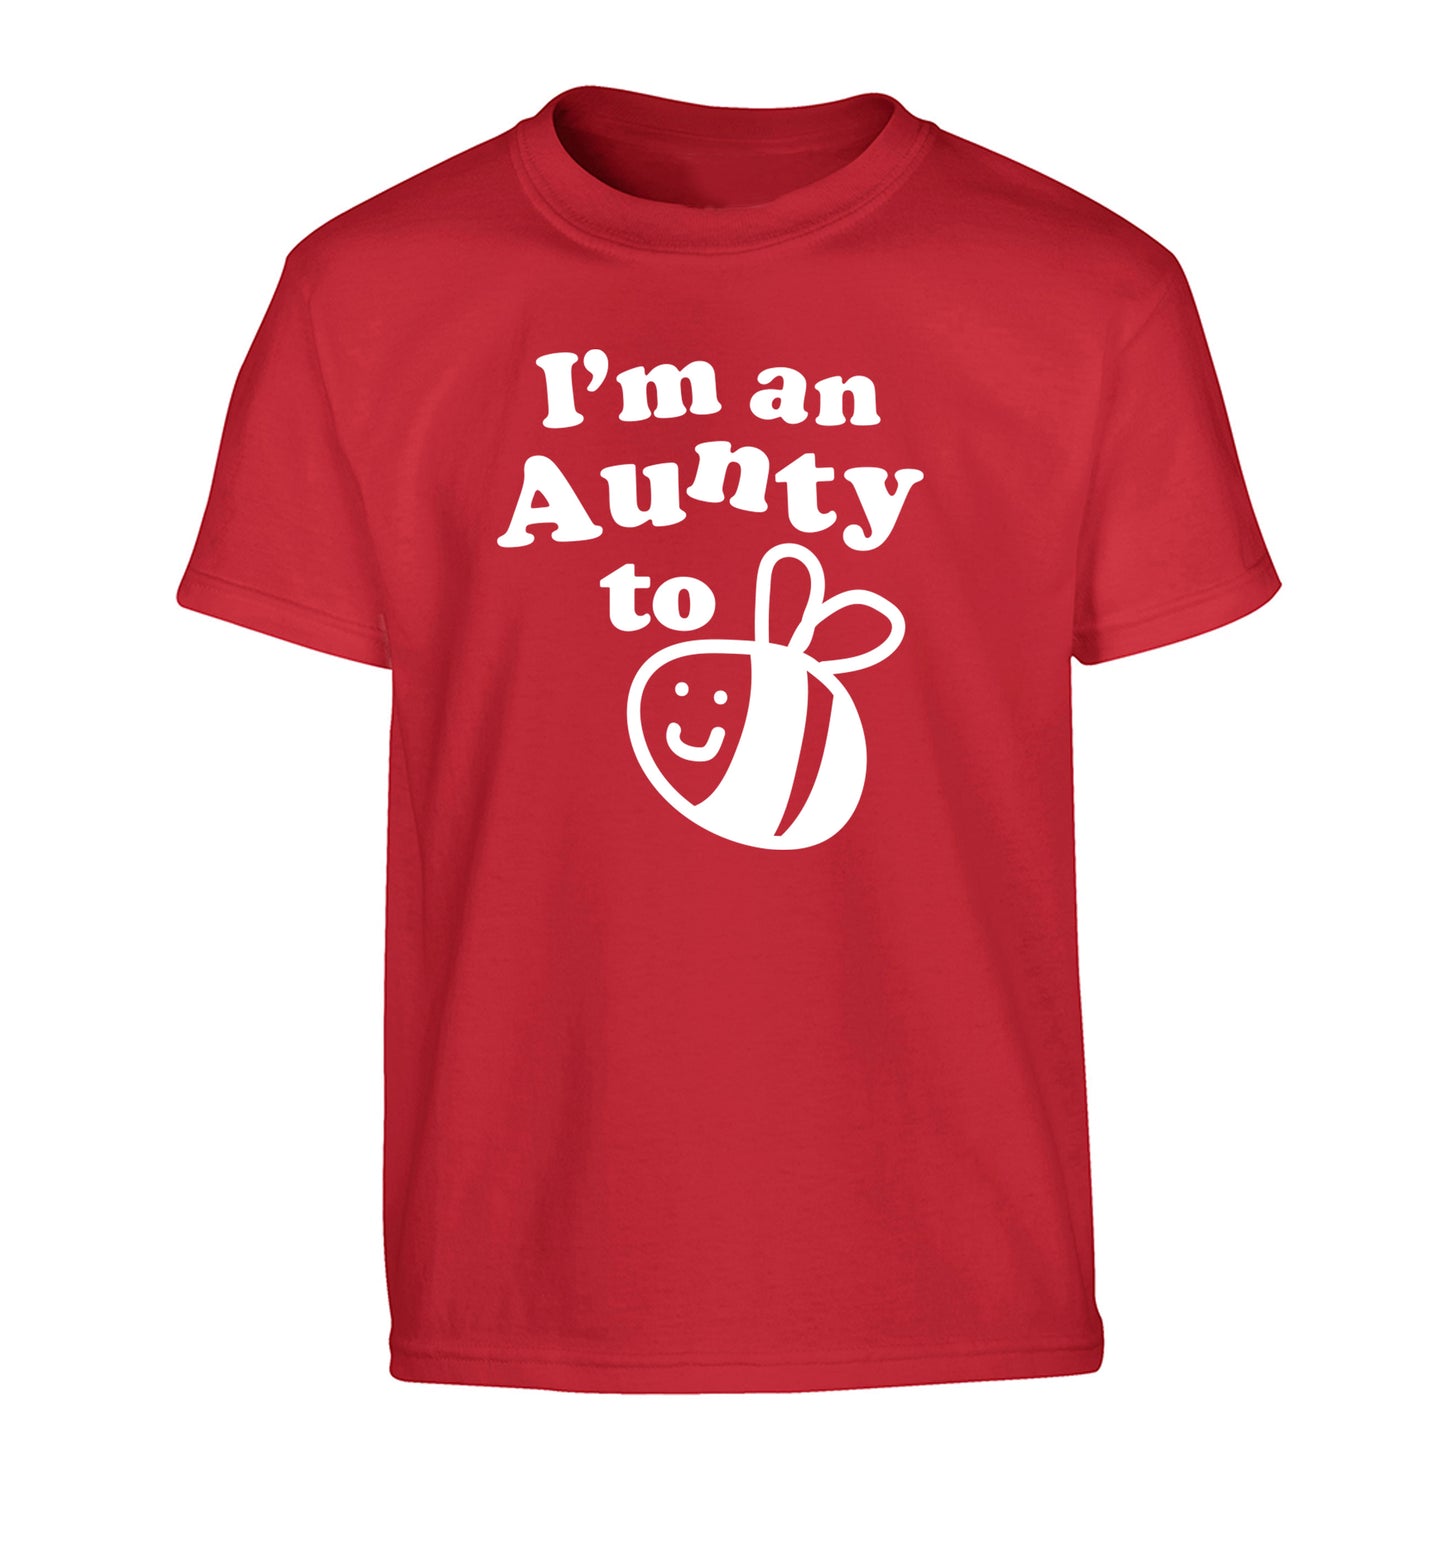 I'm an aunty to be Children's red Tshirt 12-14 Years